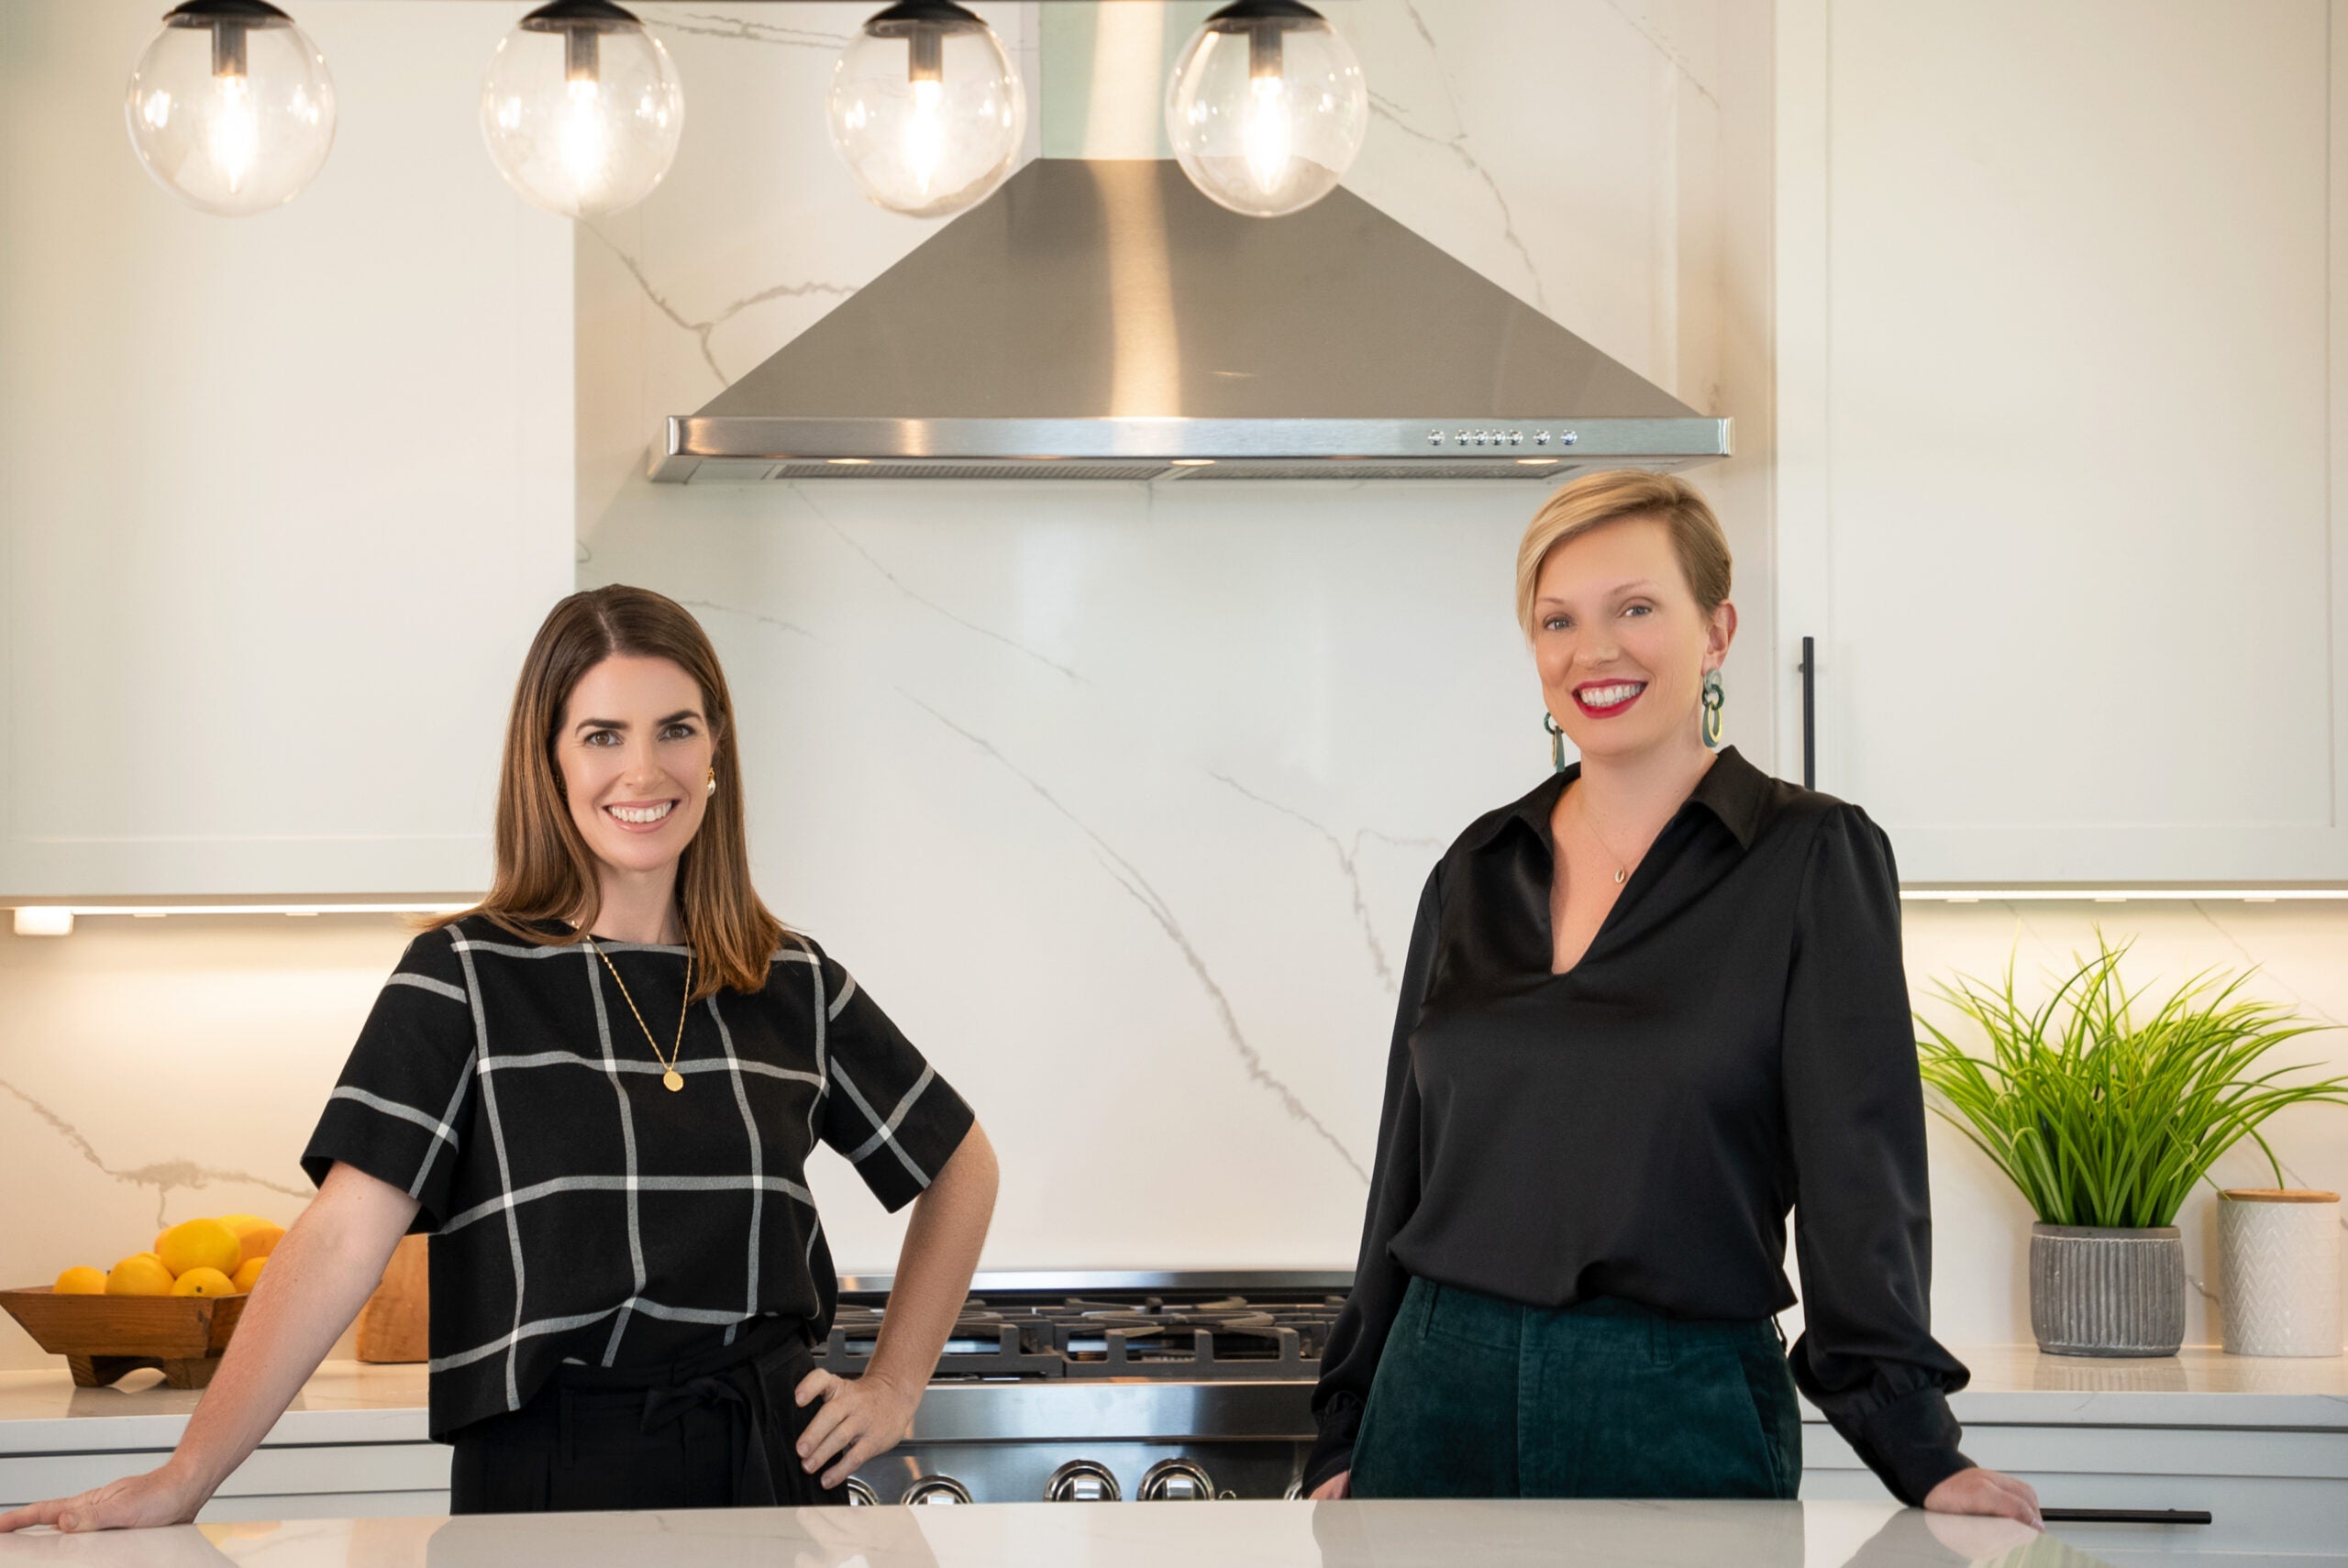 Beth Maguire and Meredith Smith smile in large, modern kitchen